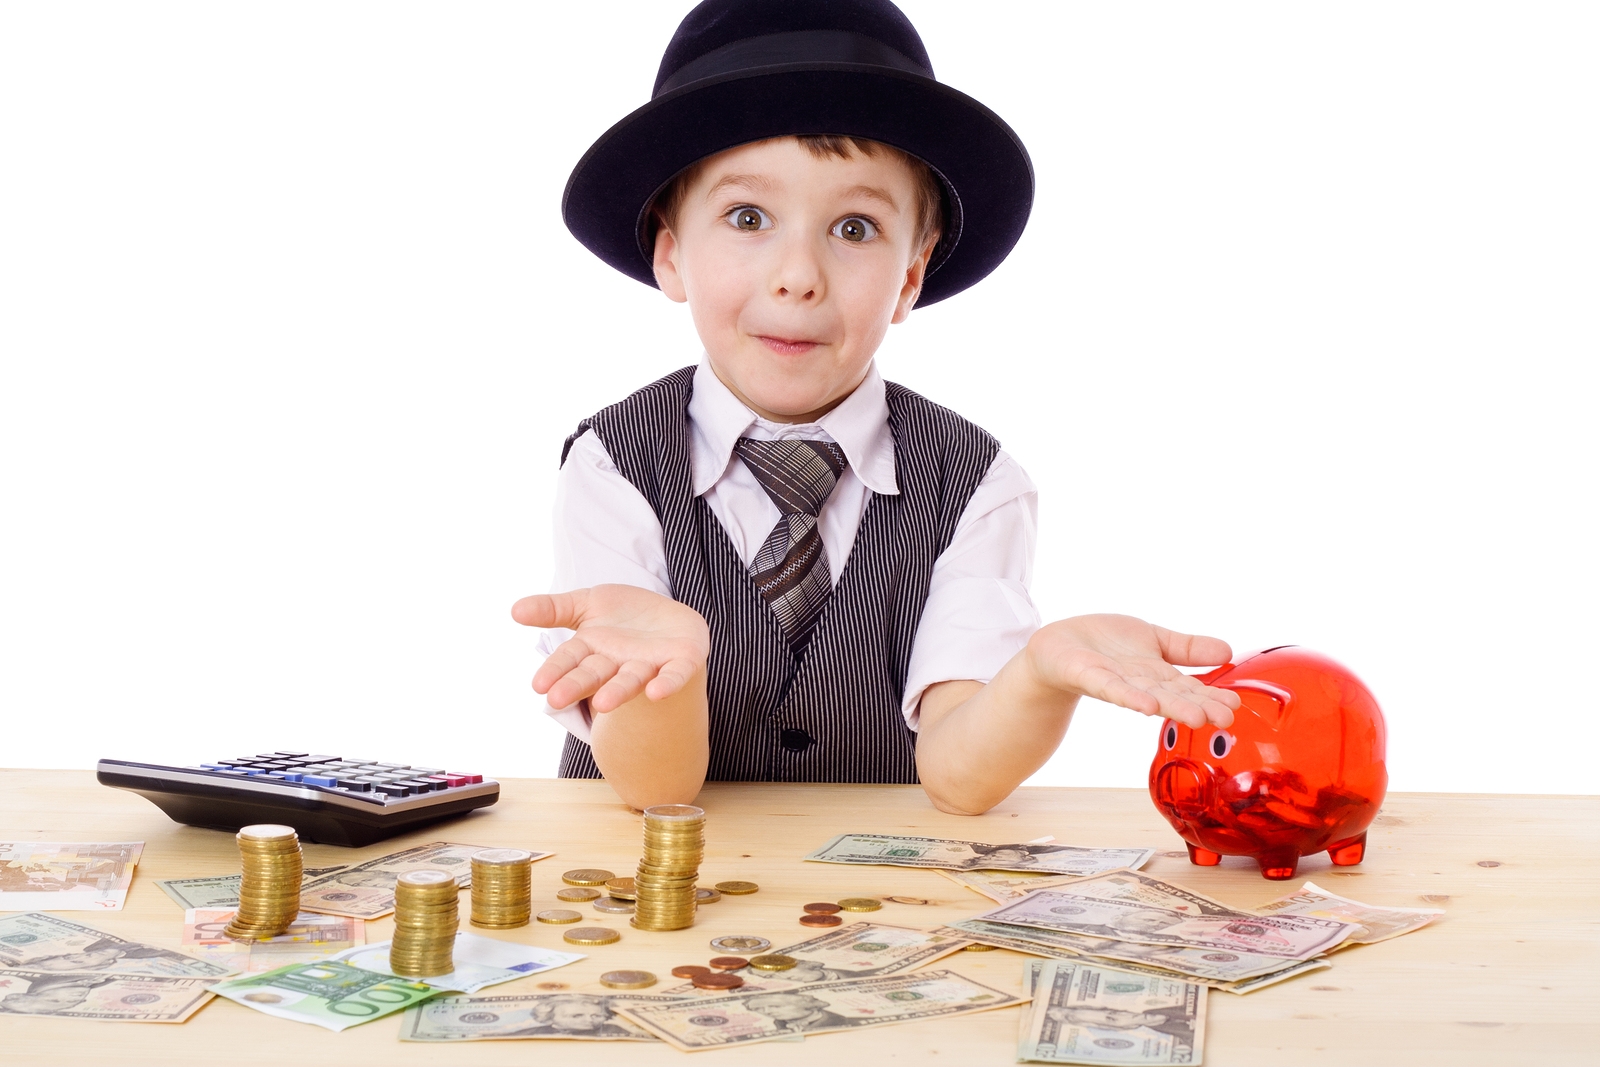 give_kids_an_allowance_to_learn_about_money_and_how_to_budget